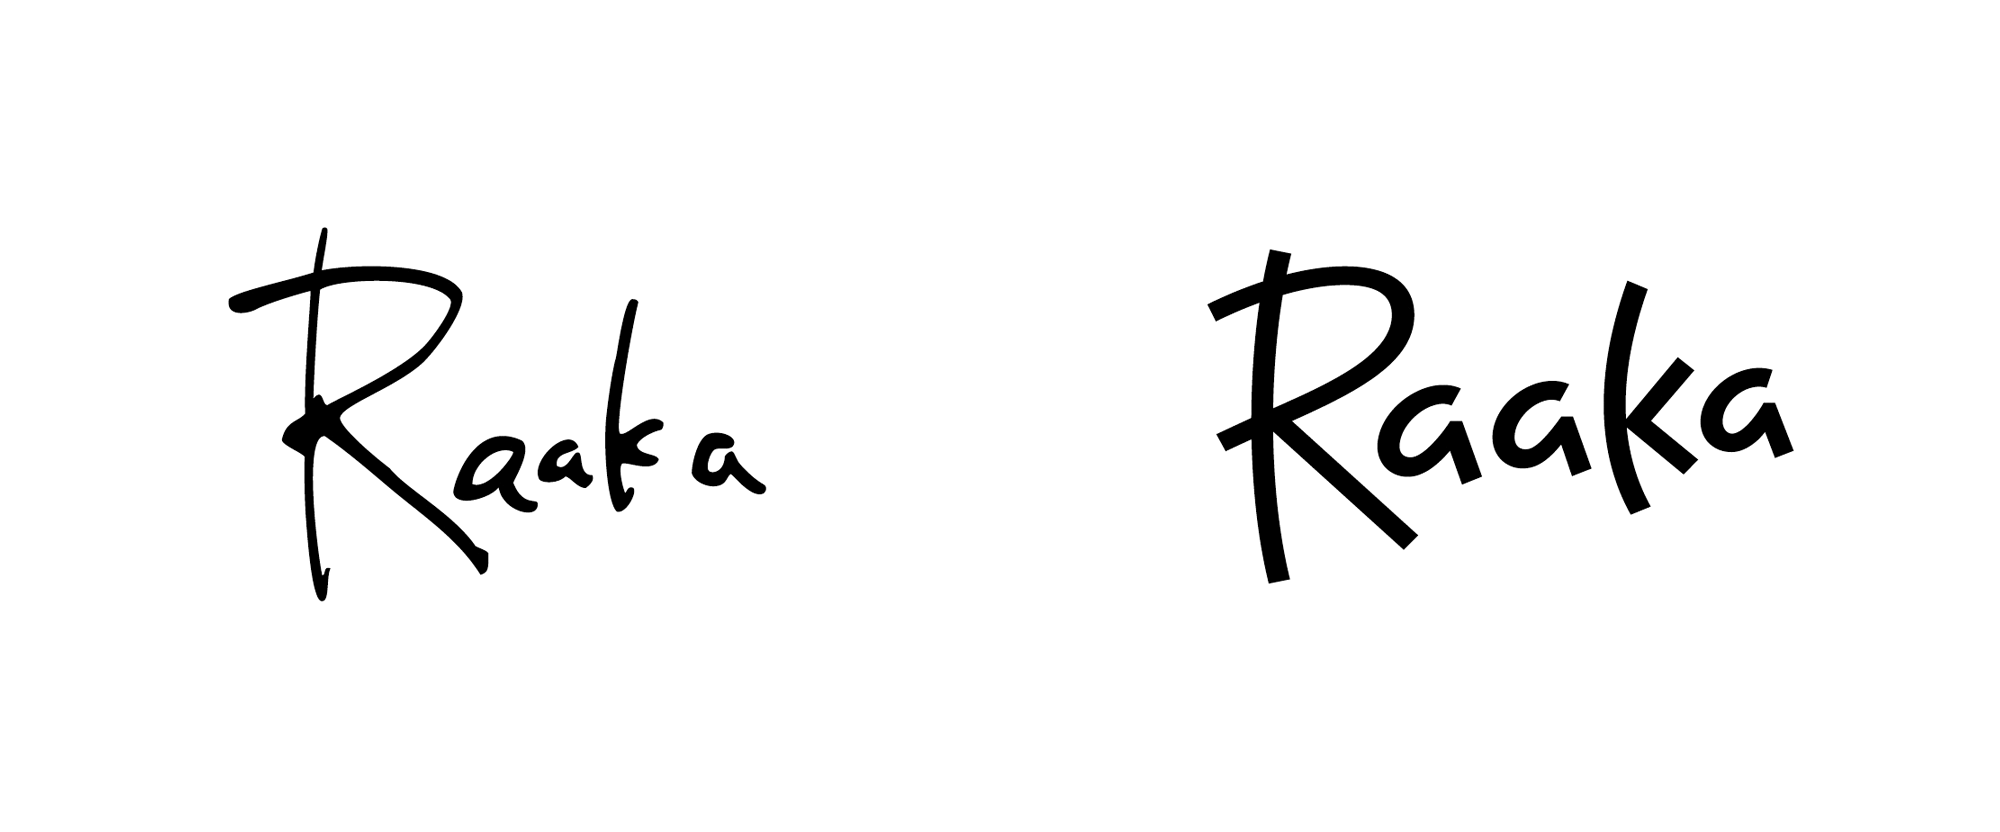 Andrea Logo - Brand New: New Logo and Packaging for Raaka by Andrea Trabucco ...